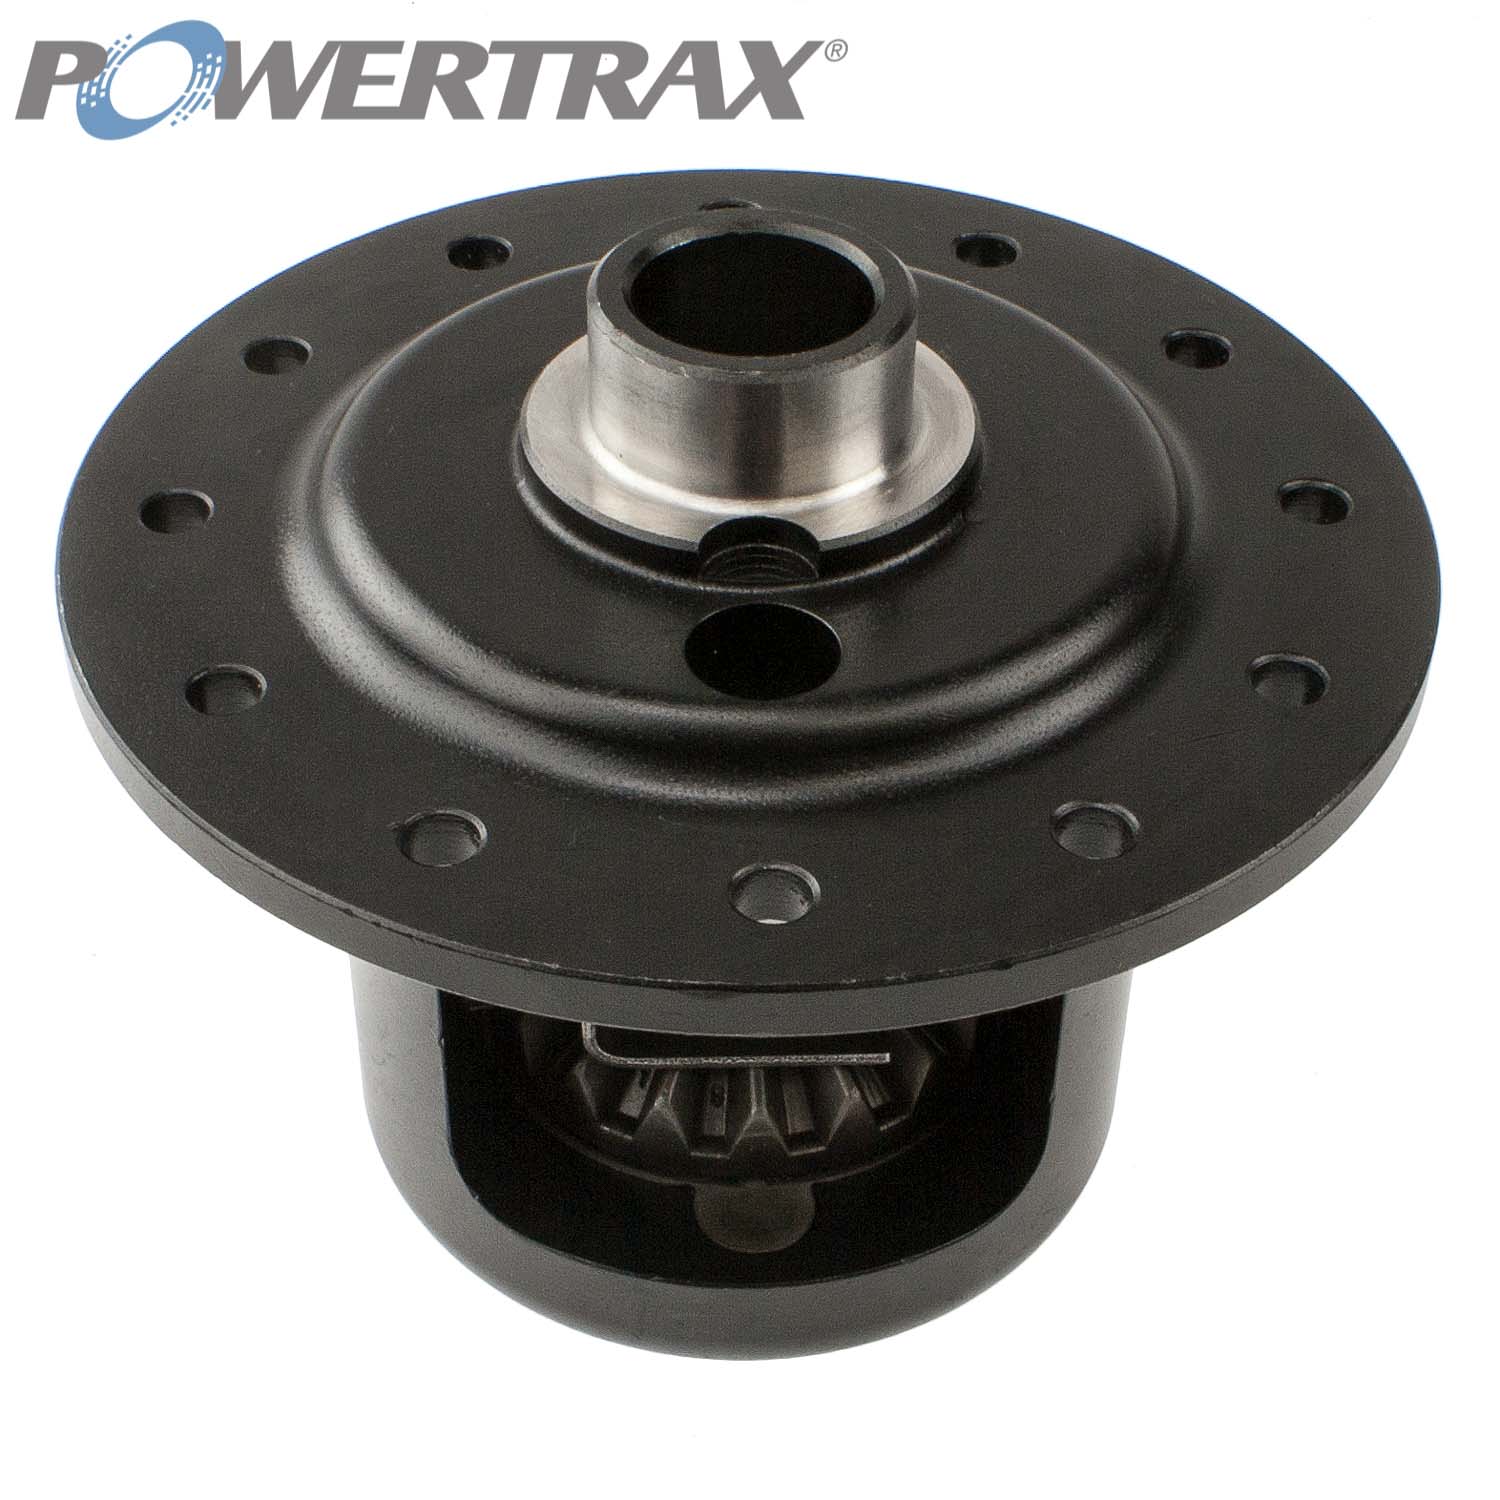 Picture of Powertrax Grip LS Traction System